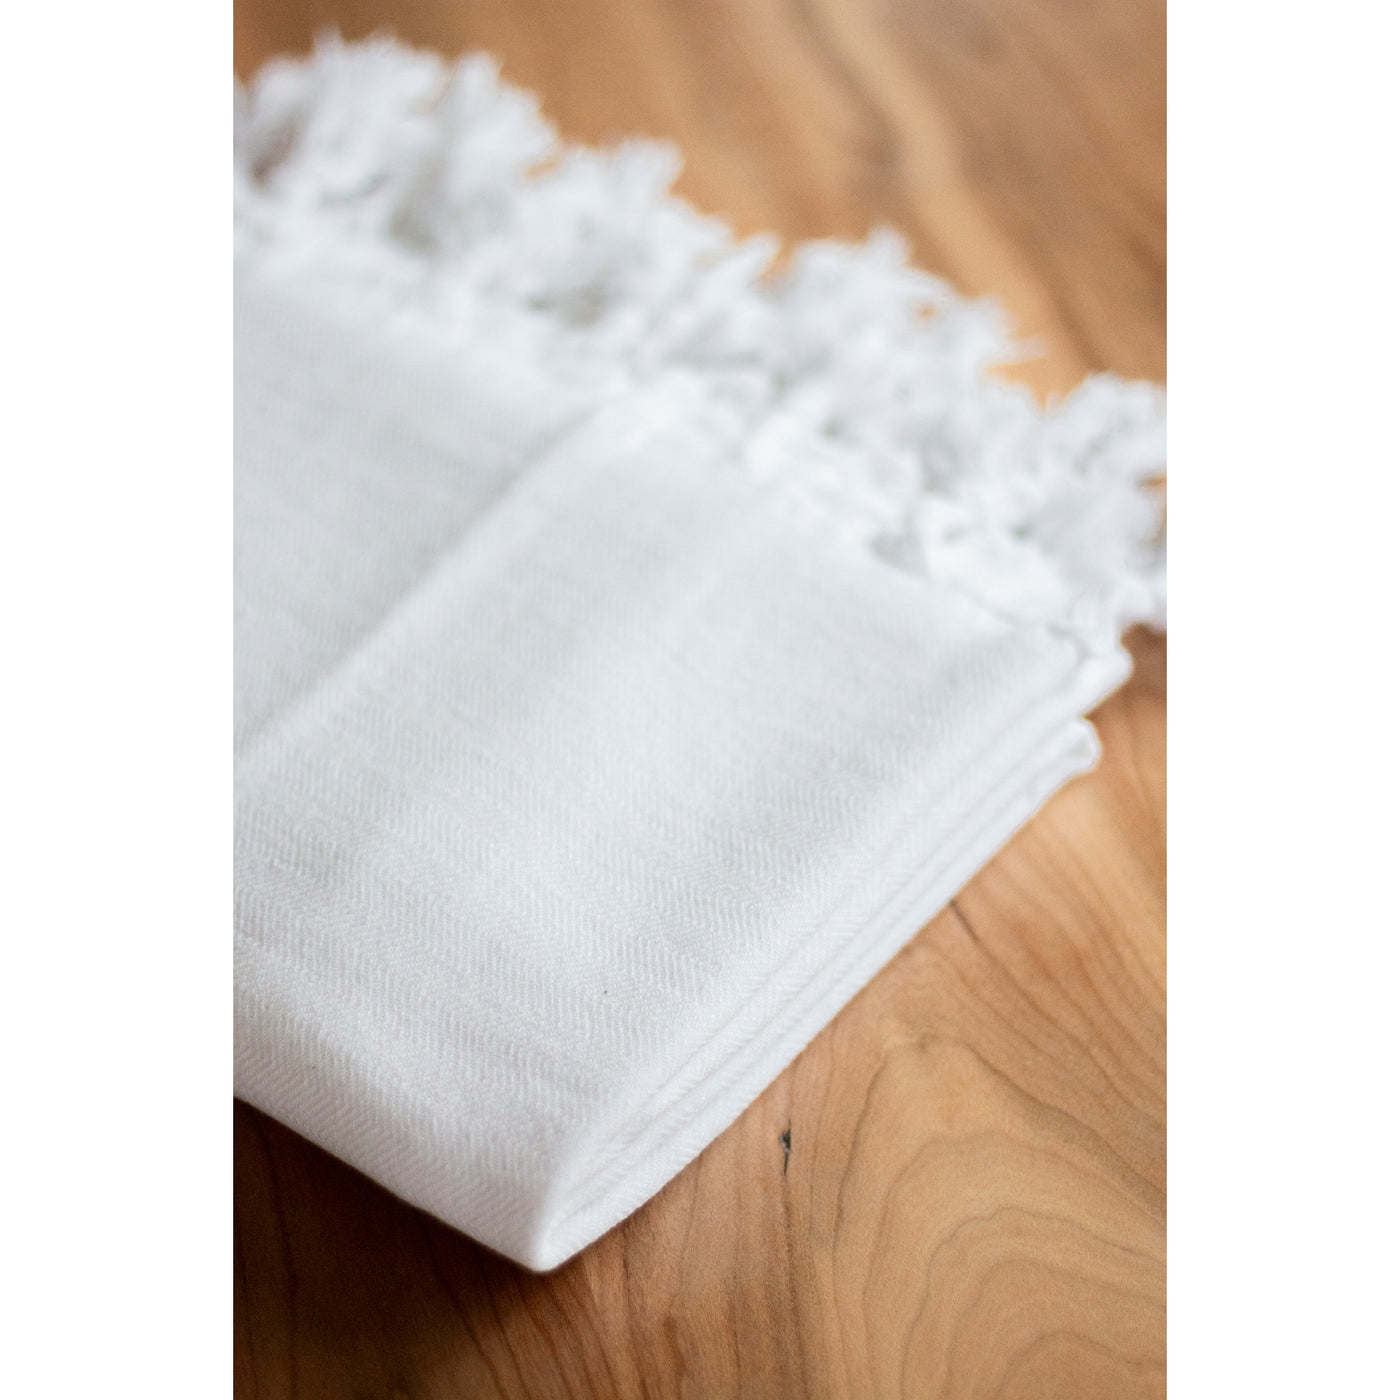 White Turkish Towel: folded on table. Made from 100% Turkish cotton & hand-loomed tassels. SKU: OVT011. Brand: House of Jude, Oversized: 63" x 39.4"